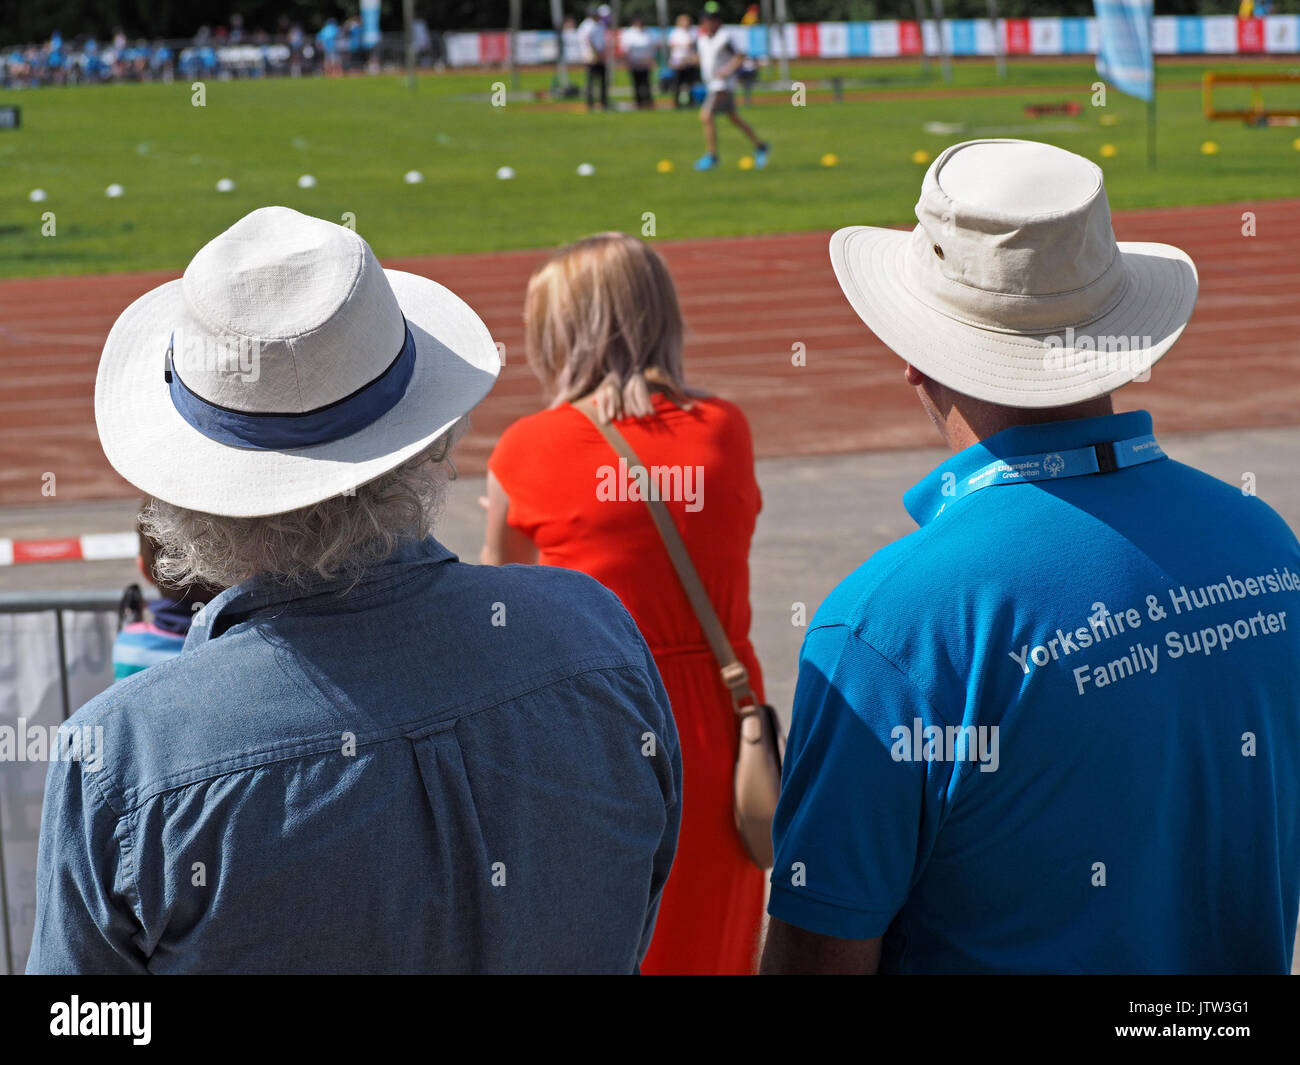 Sheffield, UK. 10th August, 2017. Spectators in sunhats watching athletics at Special Olympics National Games in Sheffield in sunshine Credit: Steve Holroyd/Alamy Live News Stock Photo